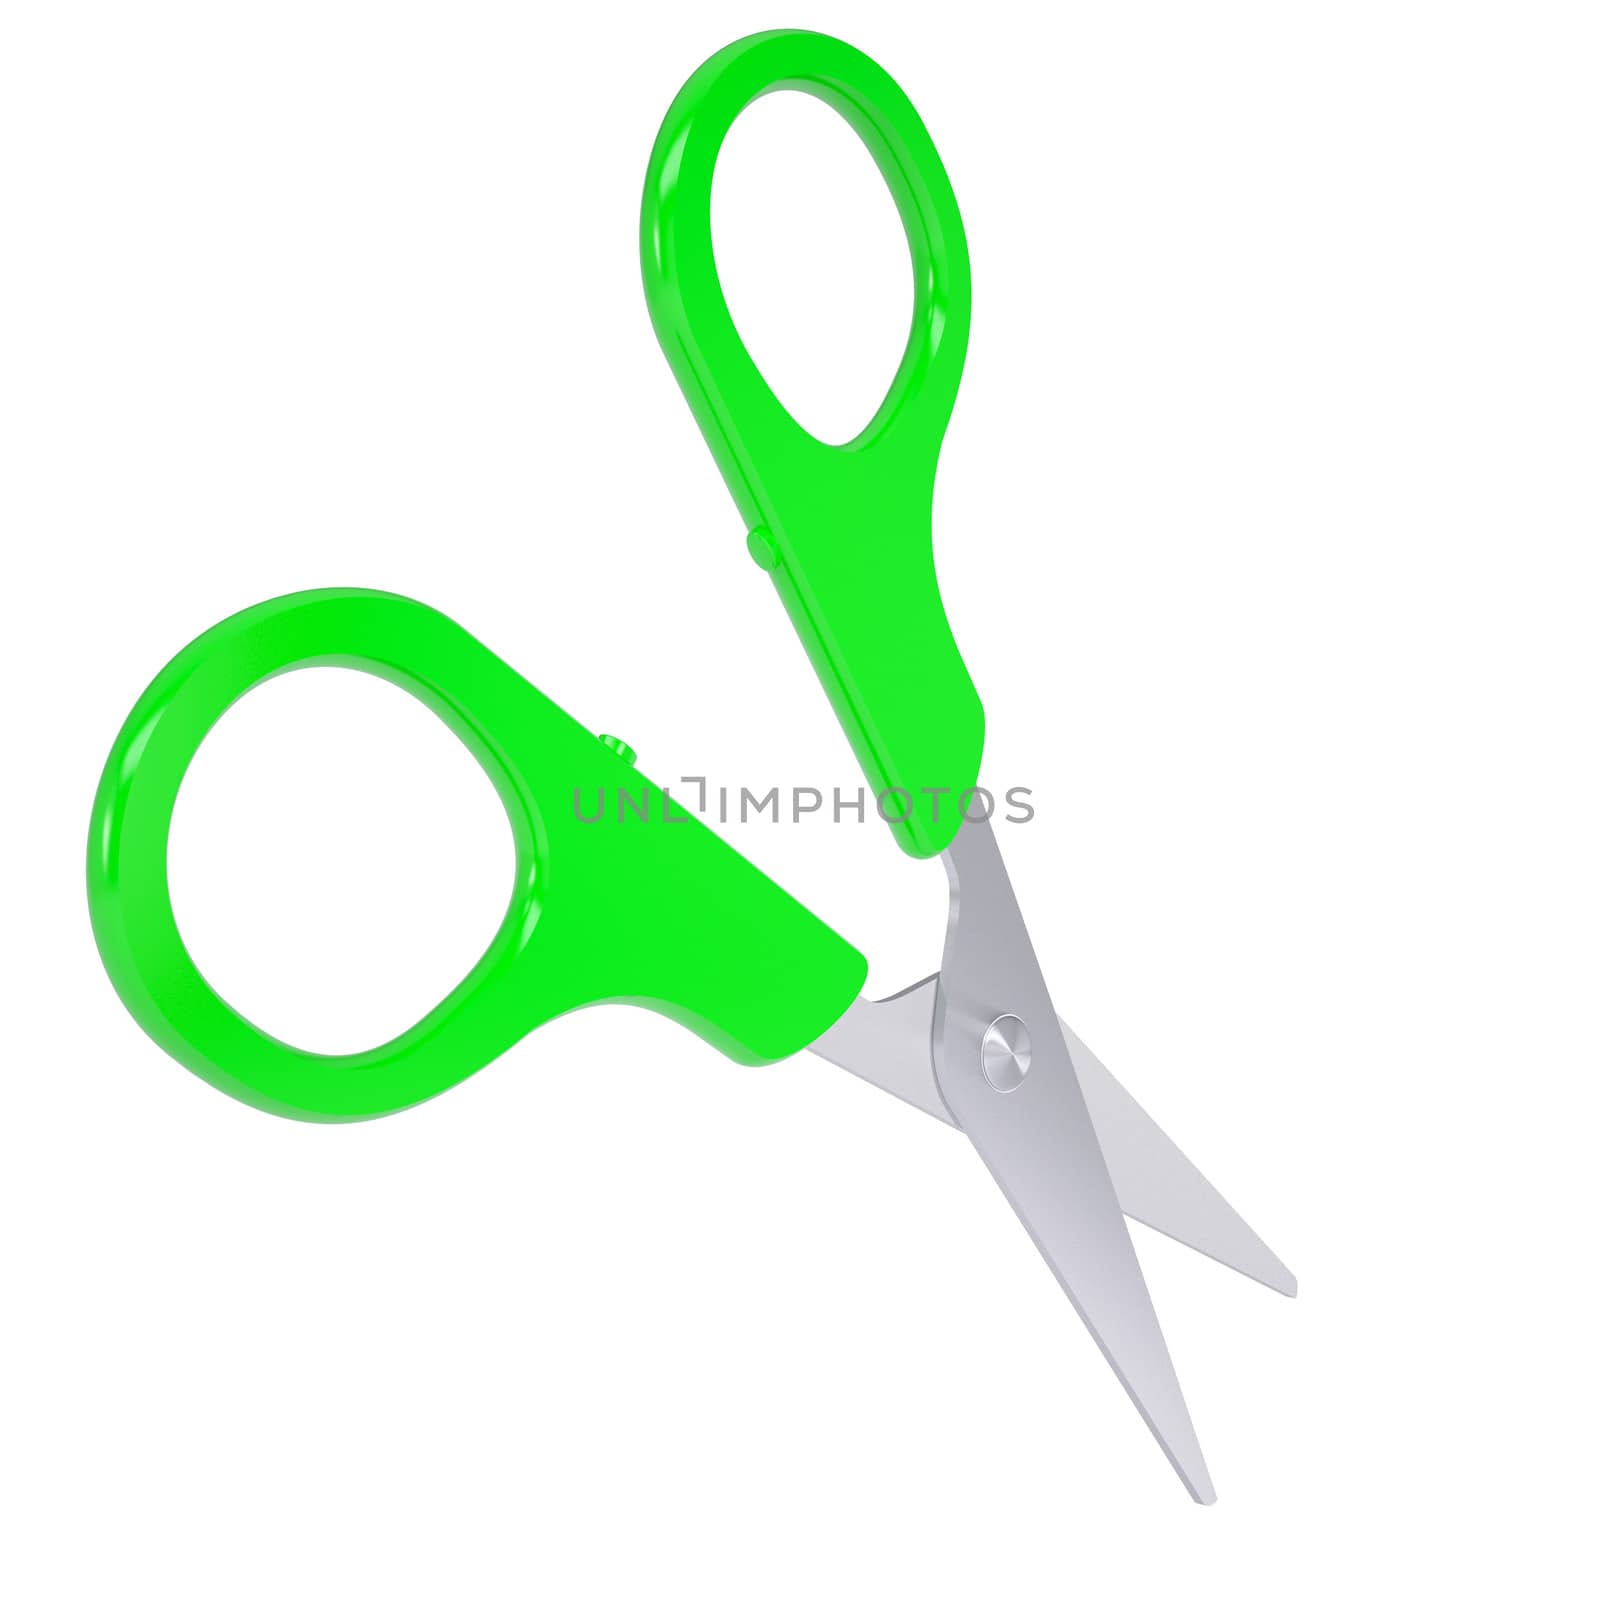 Scissors with green handles by cherezoff